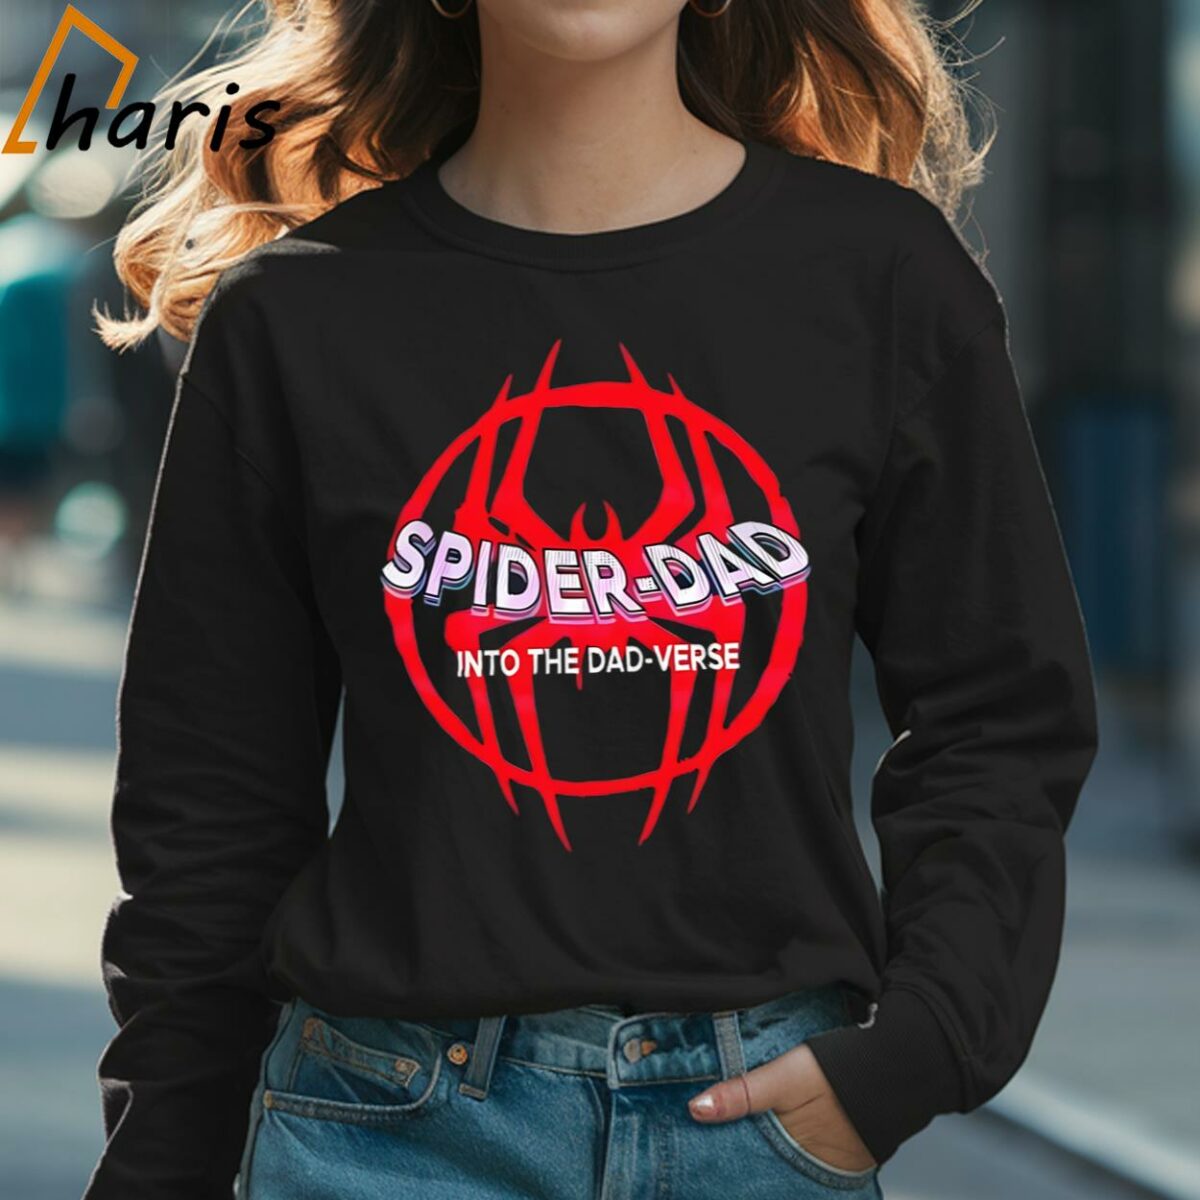 Spider Dad Into The Dadverse Shirt 3 Long sleeve shirt